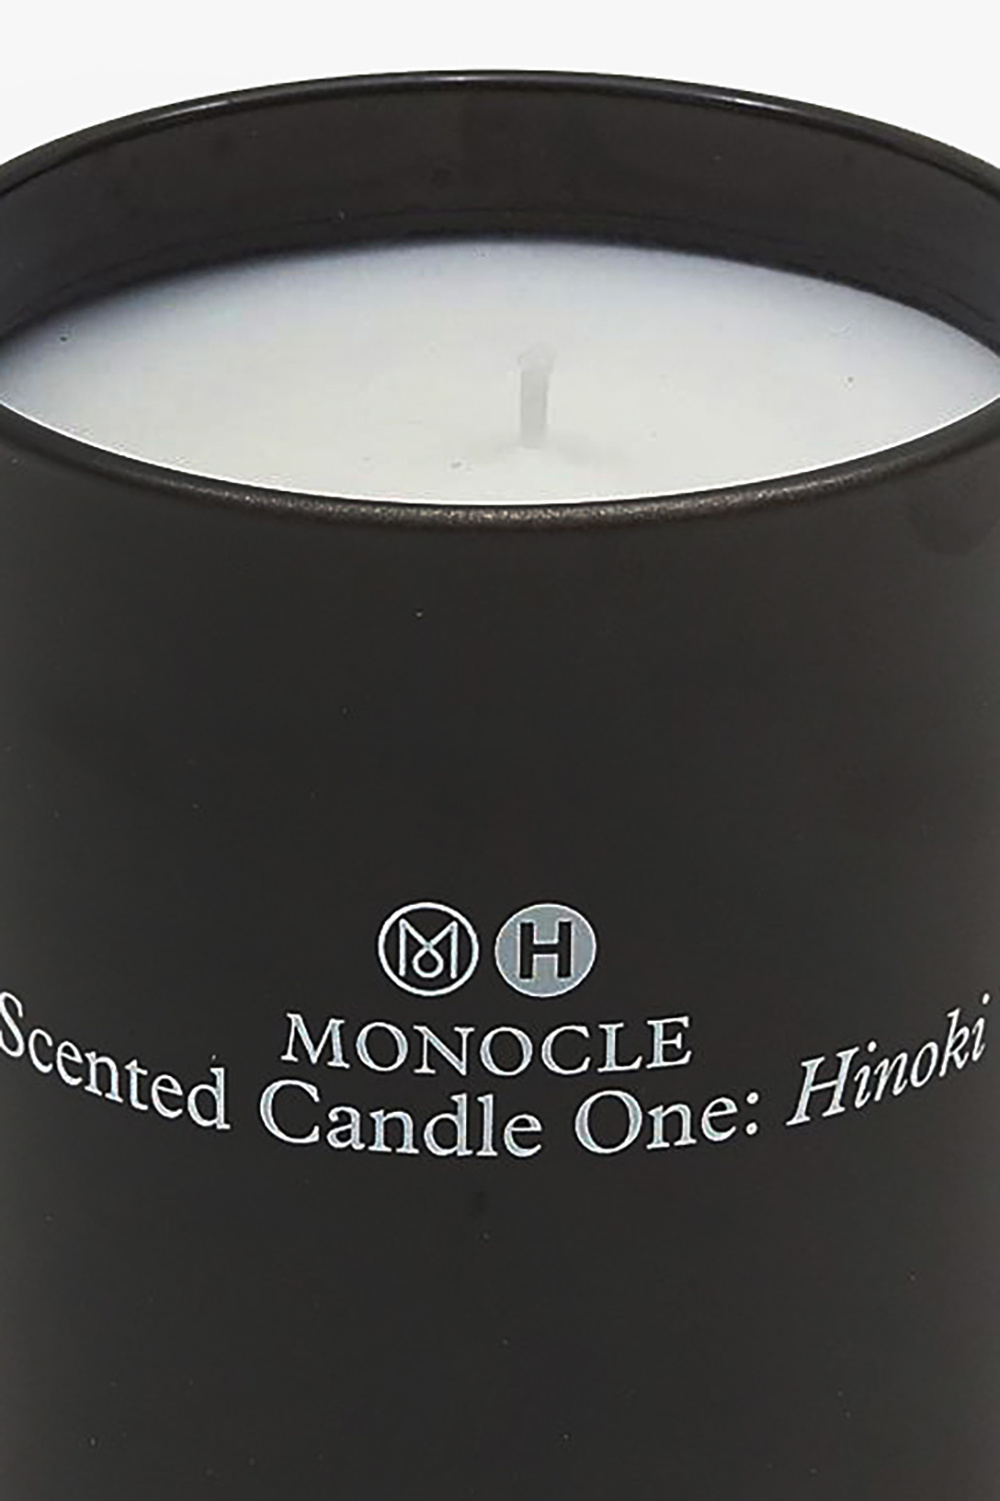 Comme des Garçons ‘Monocle One Hinoki’ scented candle